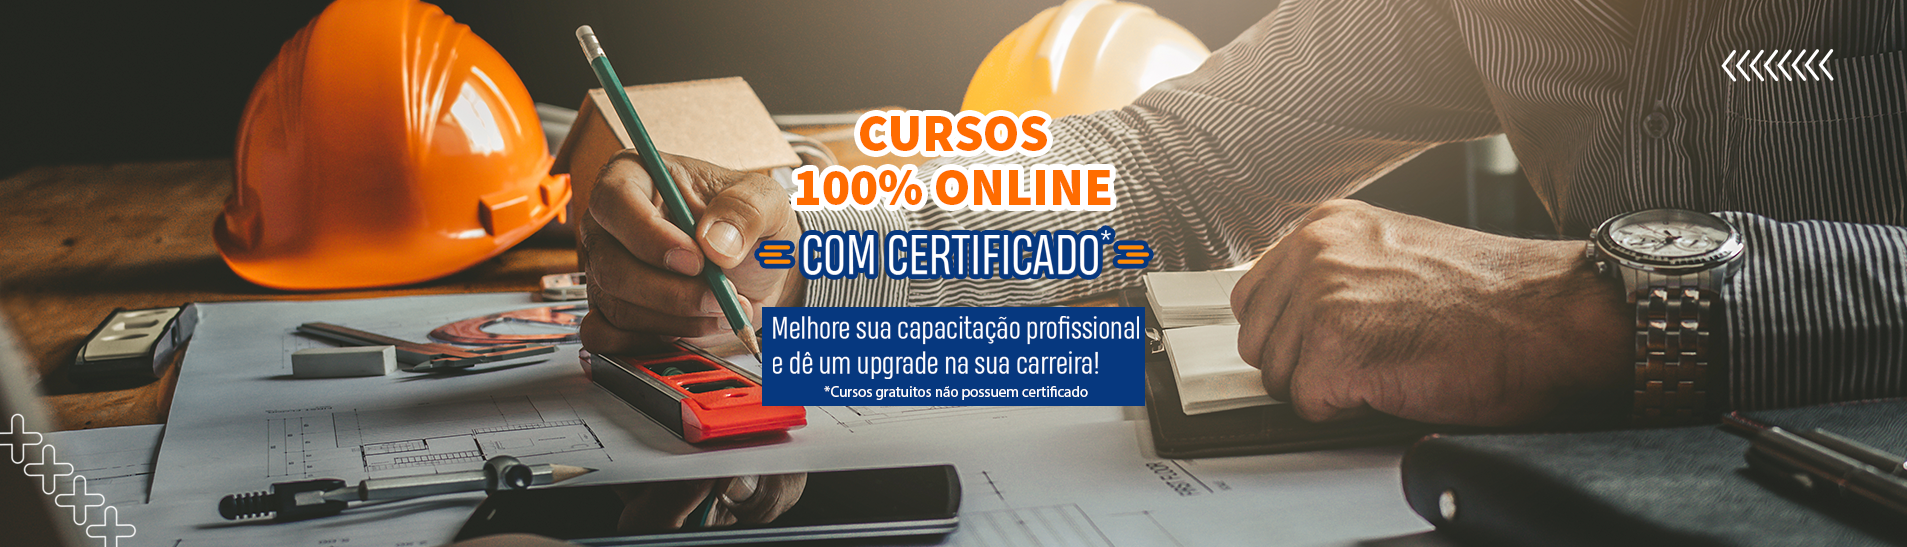 Banners%20cursos%20100 %20online